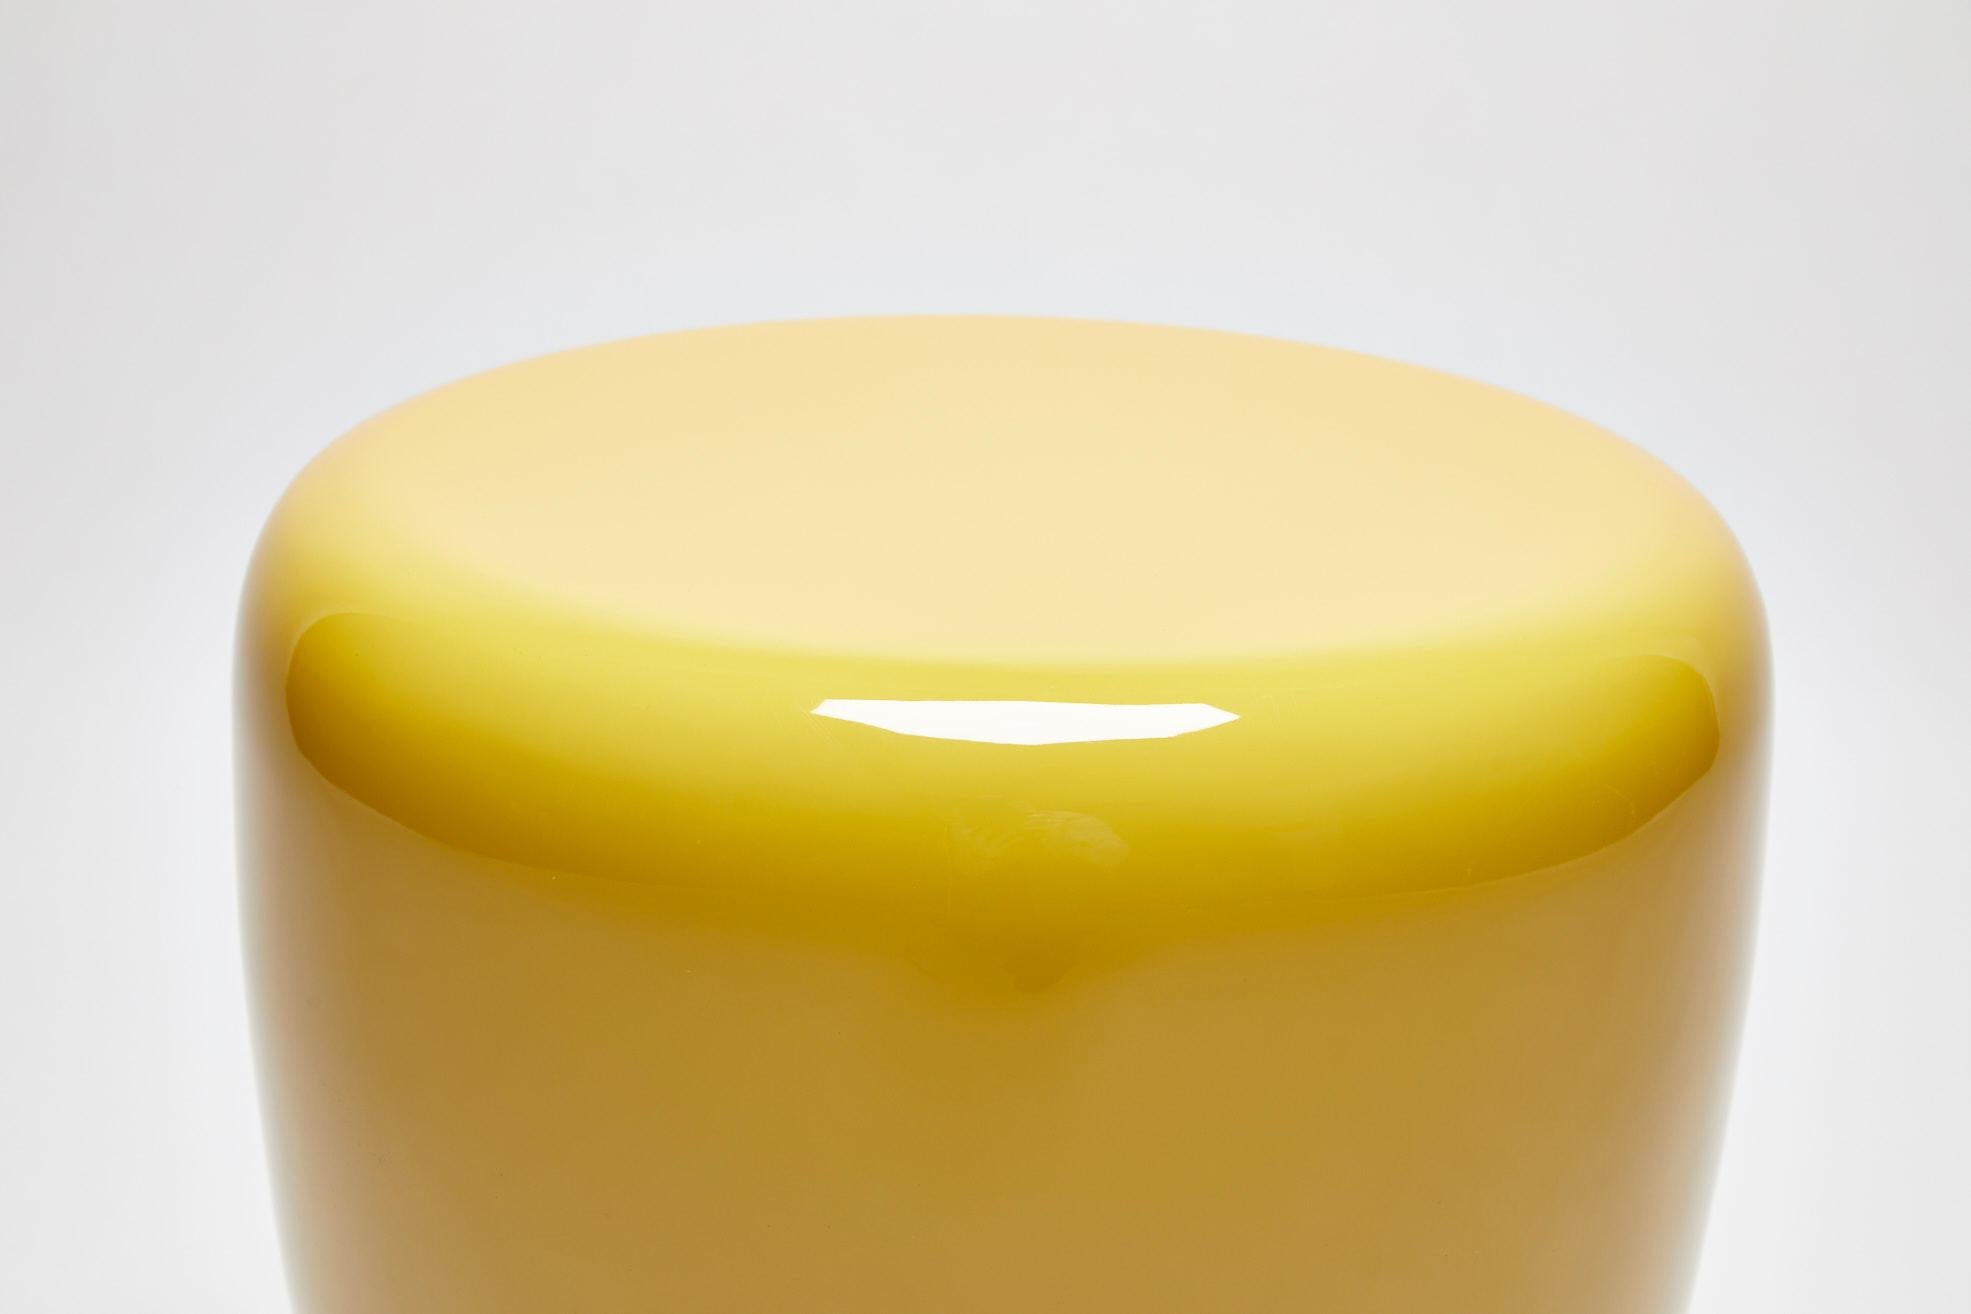 Vietnamese Side Table, Saffron DOT by Reda Amalou Design, 2017 - Glossy or mate lacquer For Sale